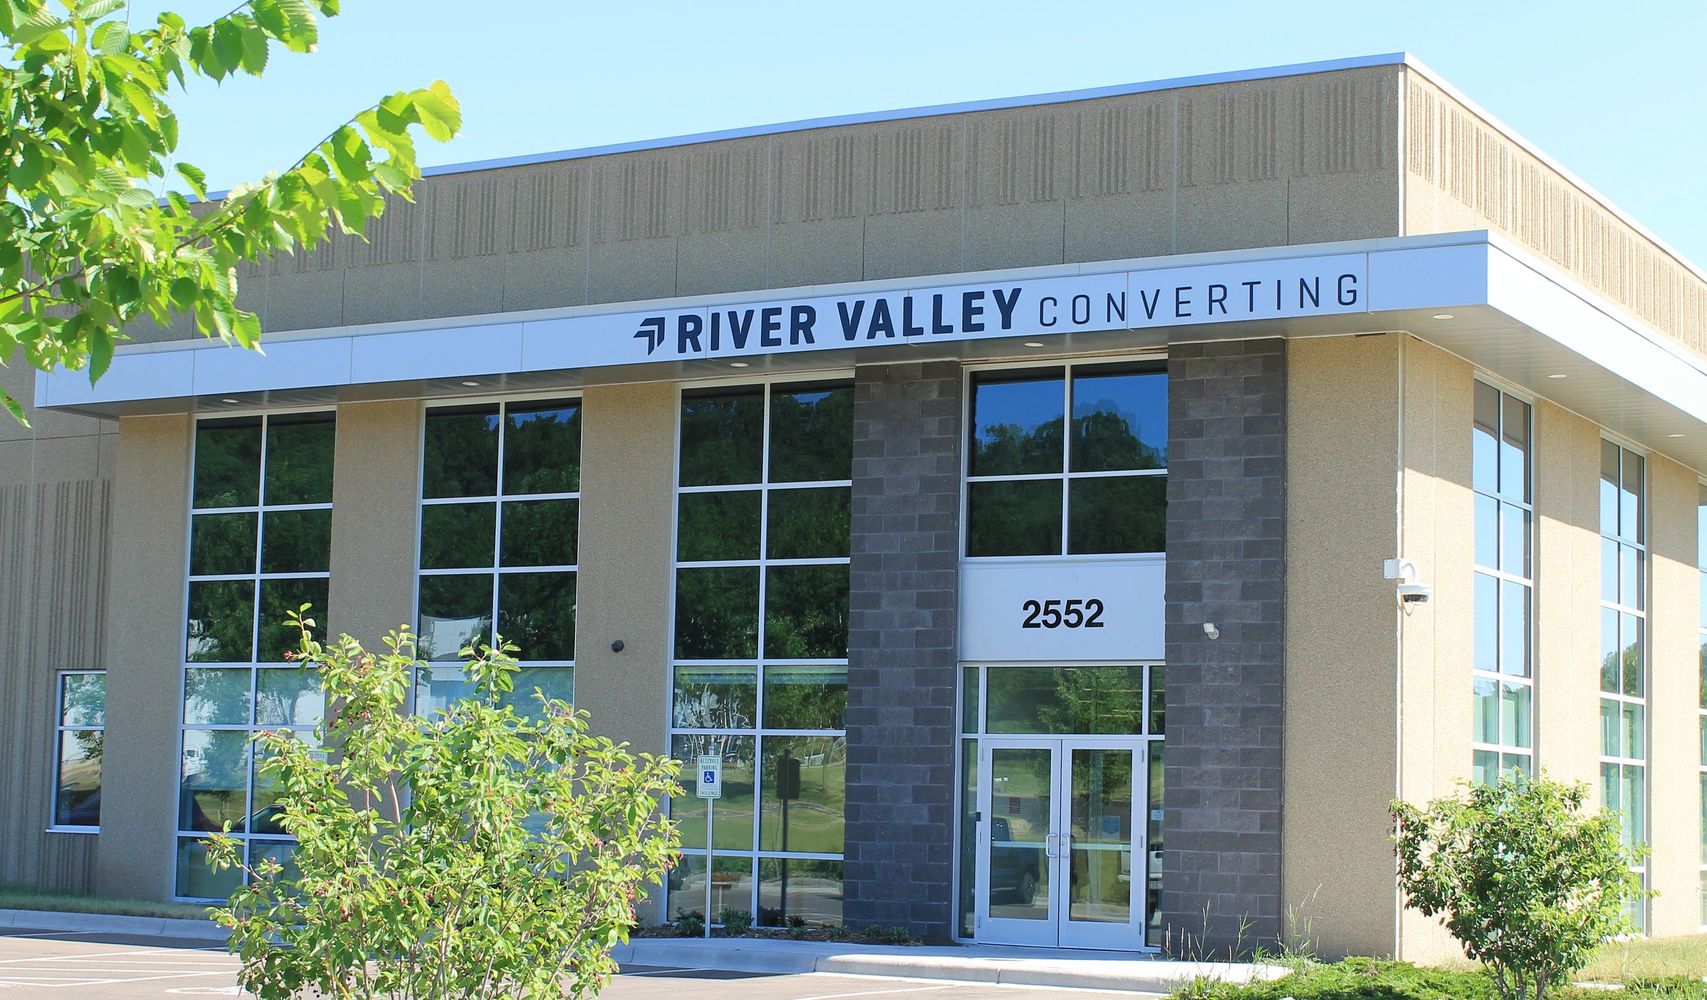 River Valley Converting - a paper and packaging converting company in River Falls Wisconsin.